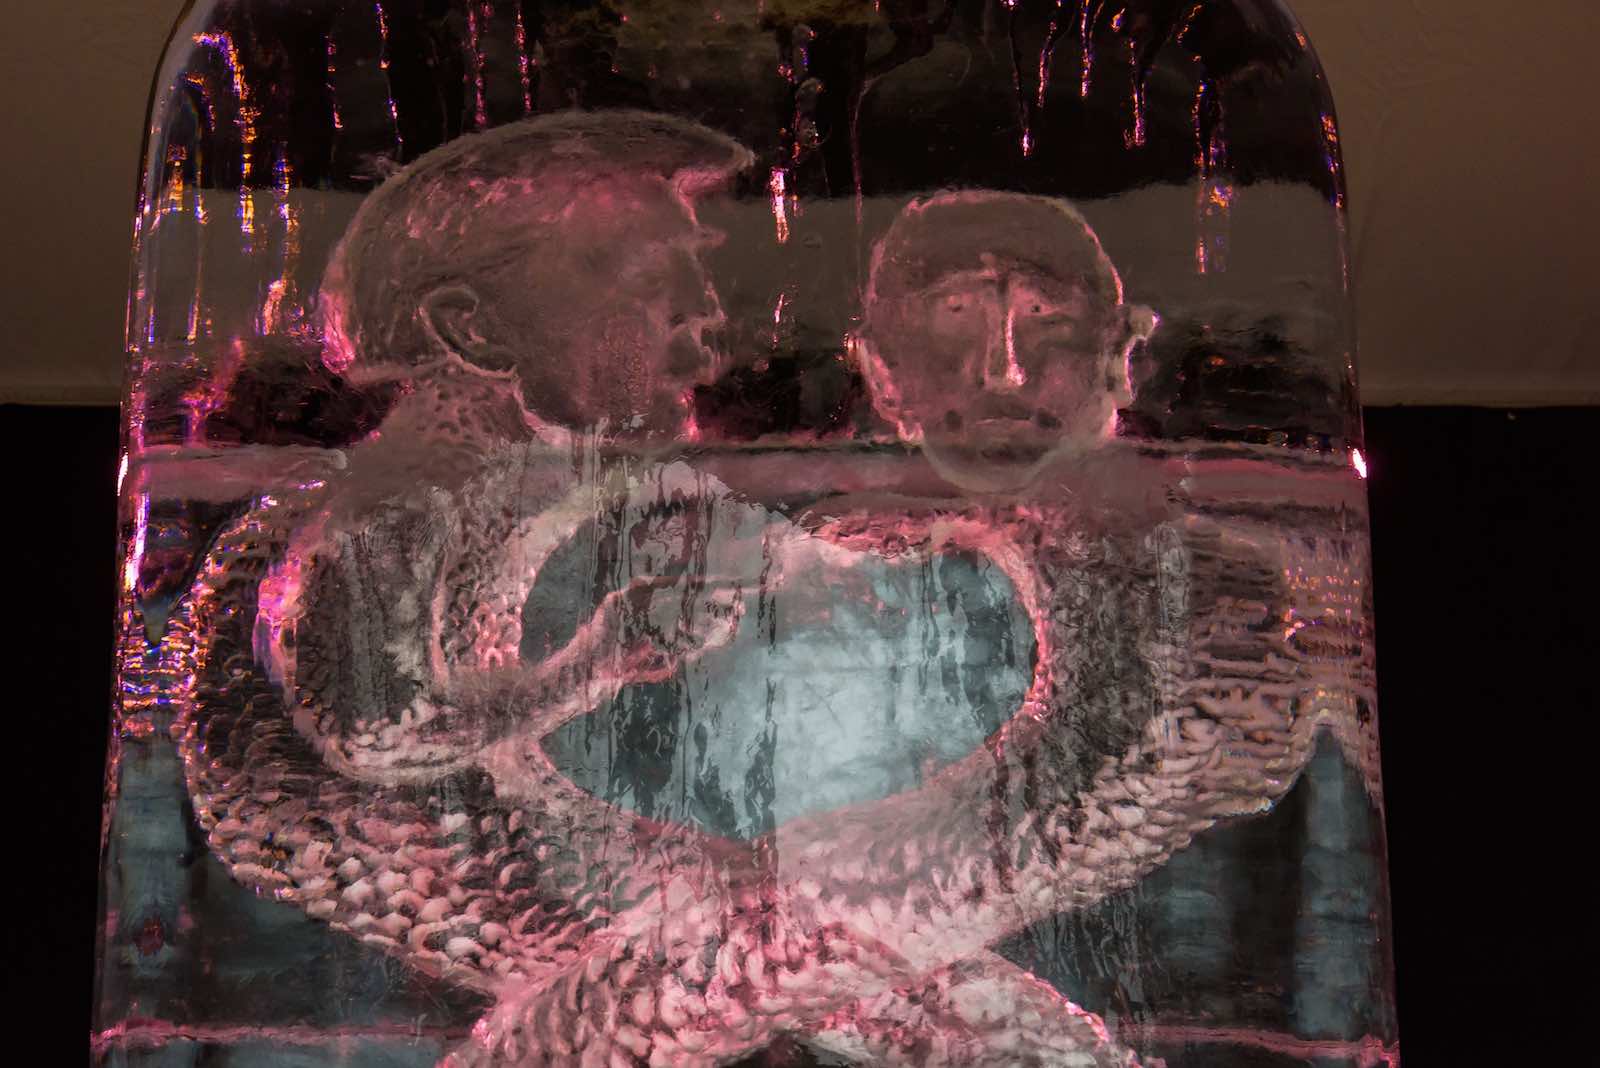 The ice sculpture “Genie in a bottle” by Kestutis Musteikis and Vytautas Musteikis from Lithuania during a festival in Jelgava city, Latvia, in February (Gints Ivuskans/AFP/Getty Images)